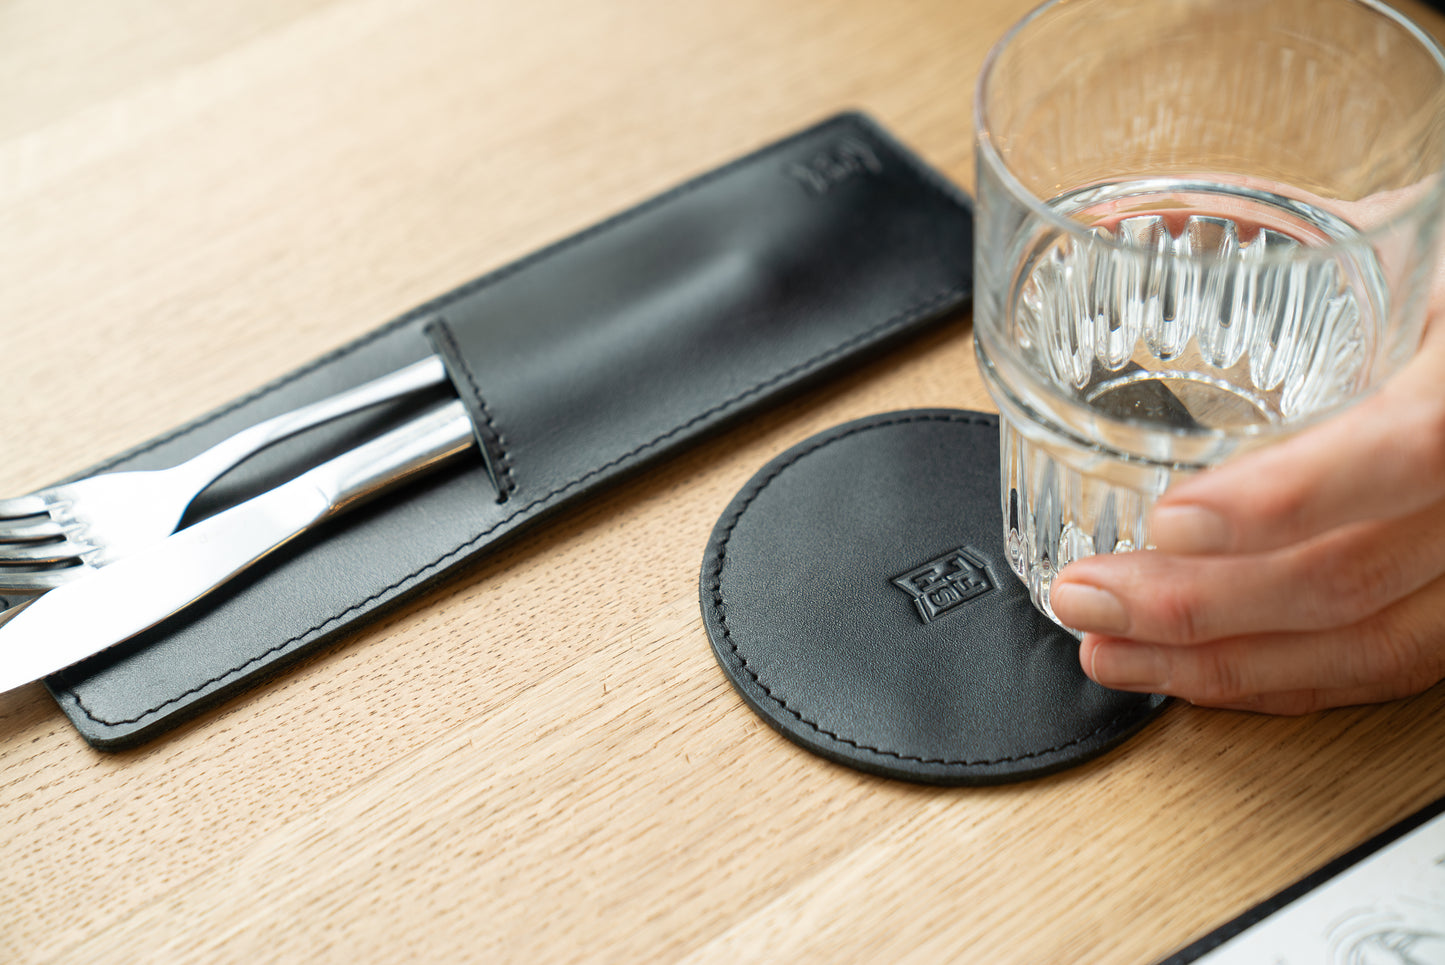 Accessories for restaurants, cafes, bars and hotels